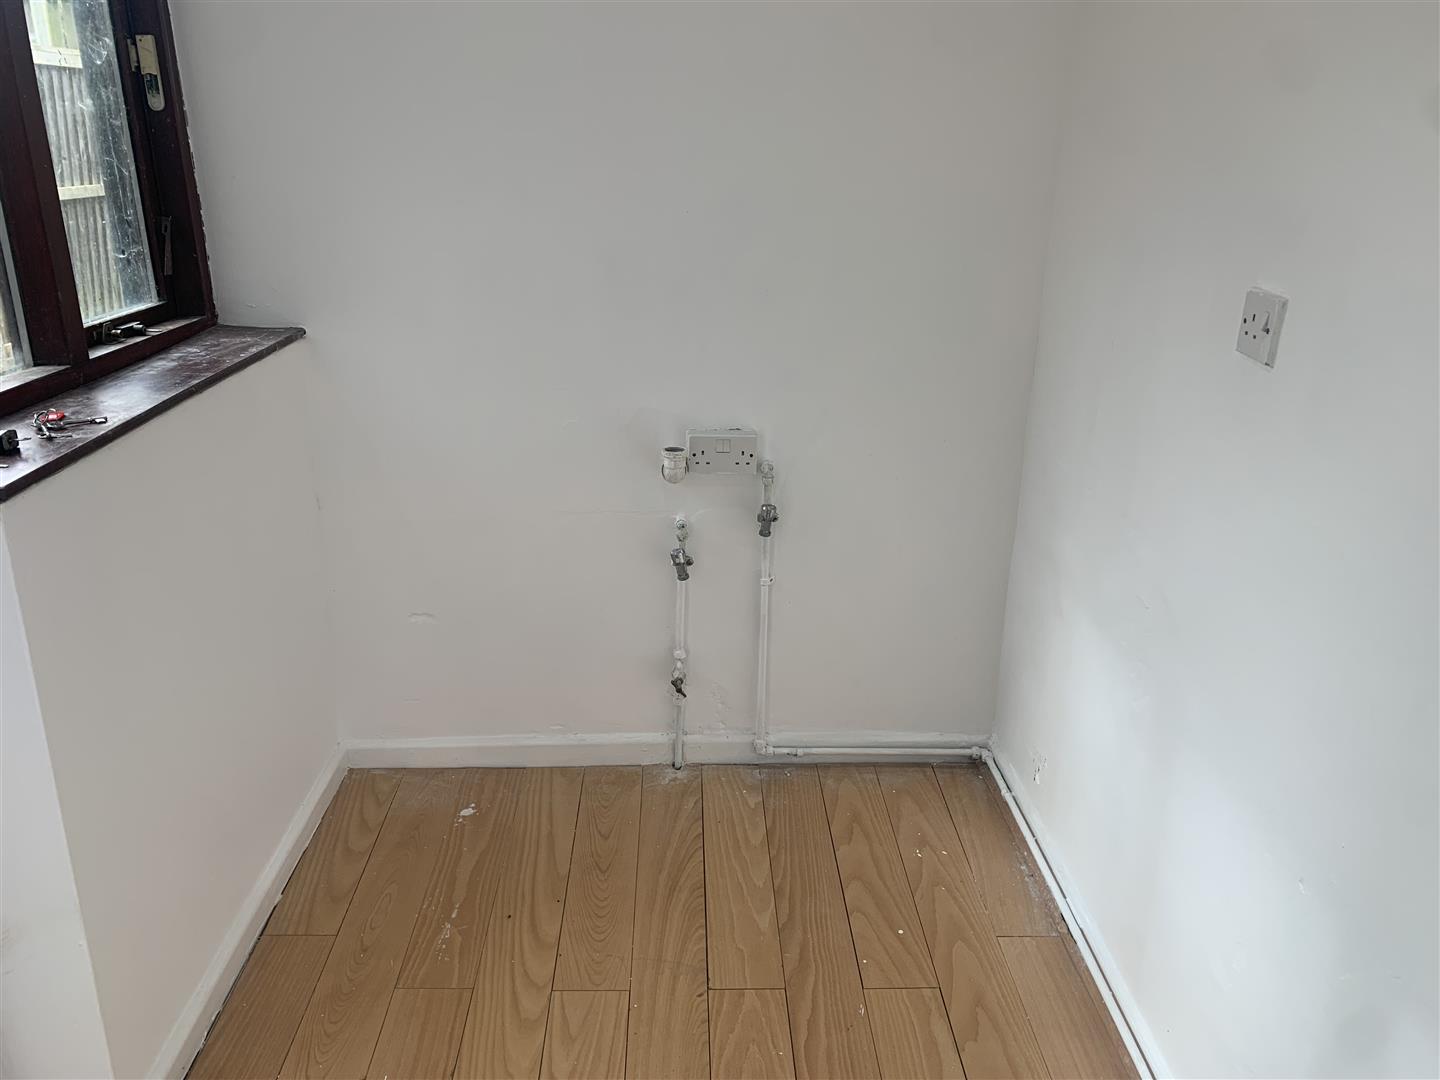 2 bed  to rent  - Property Image 4